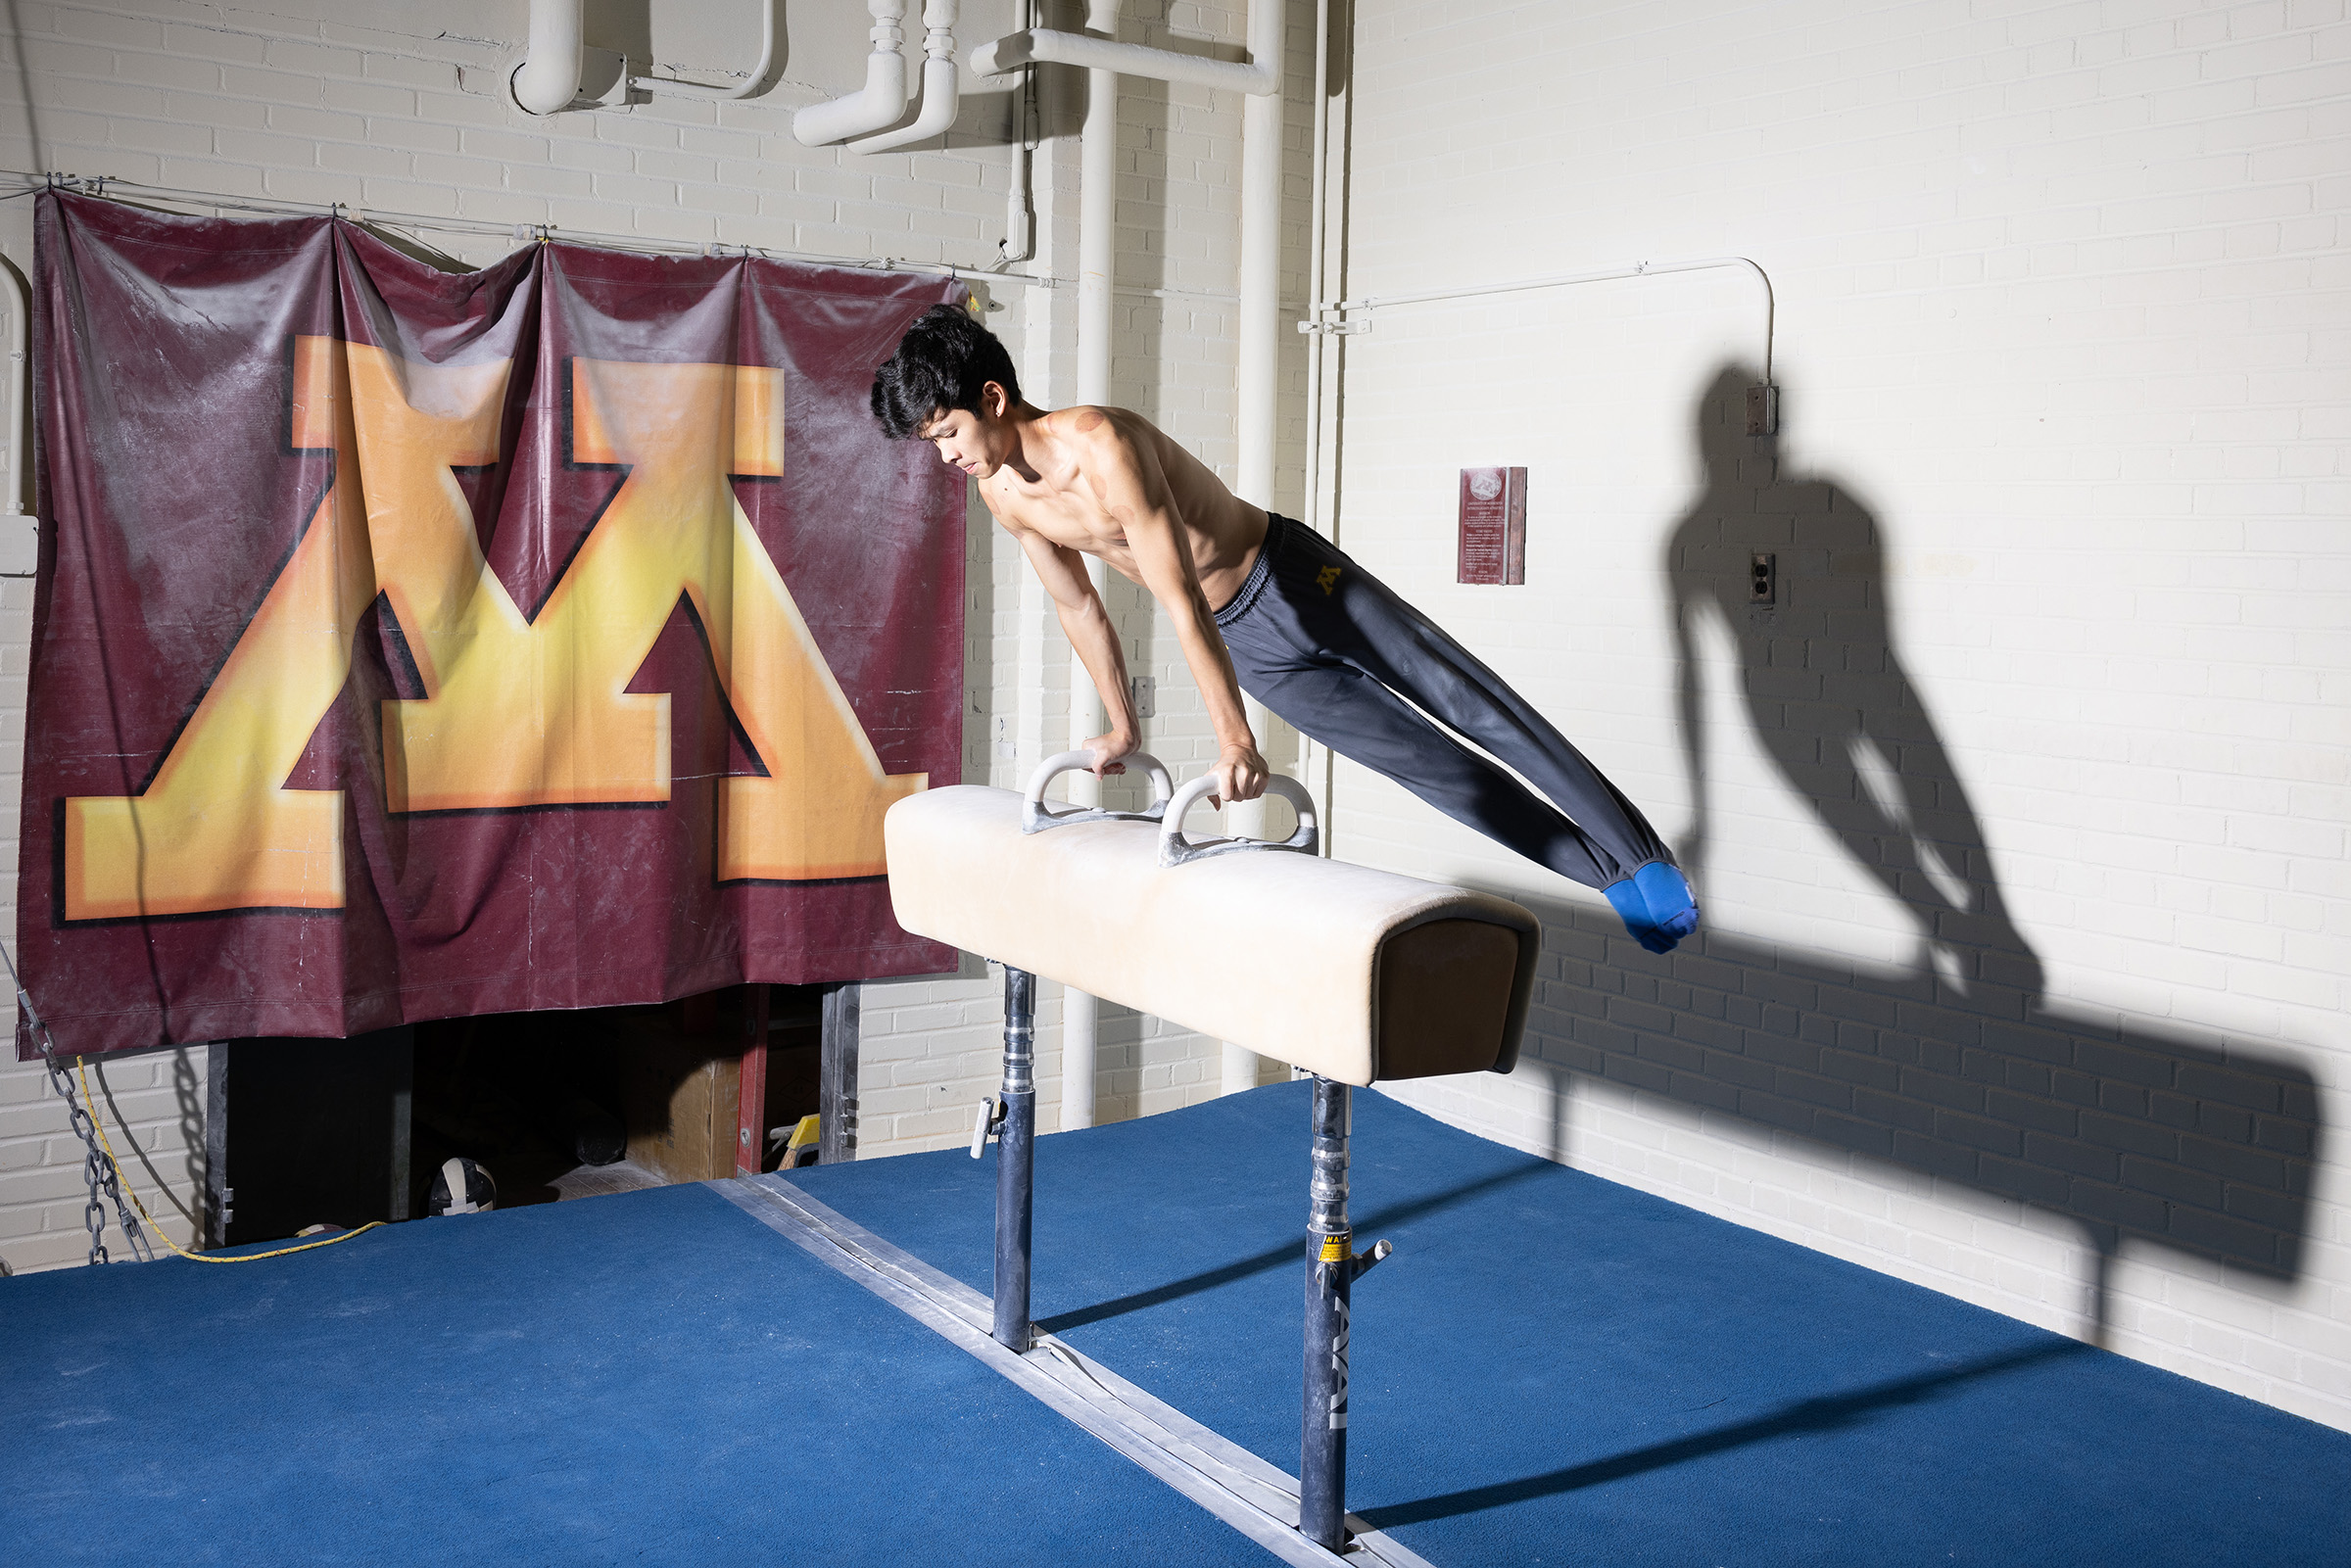 Evan Ng, talented gymnast soaring to new heights.